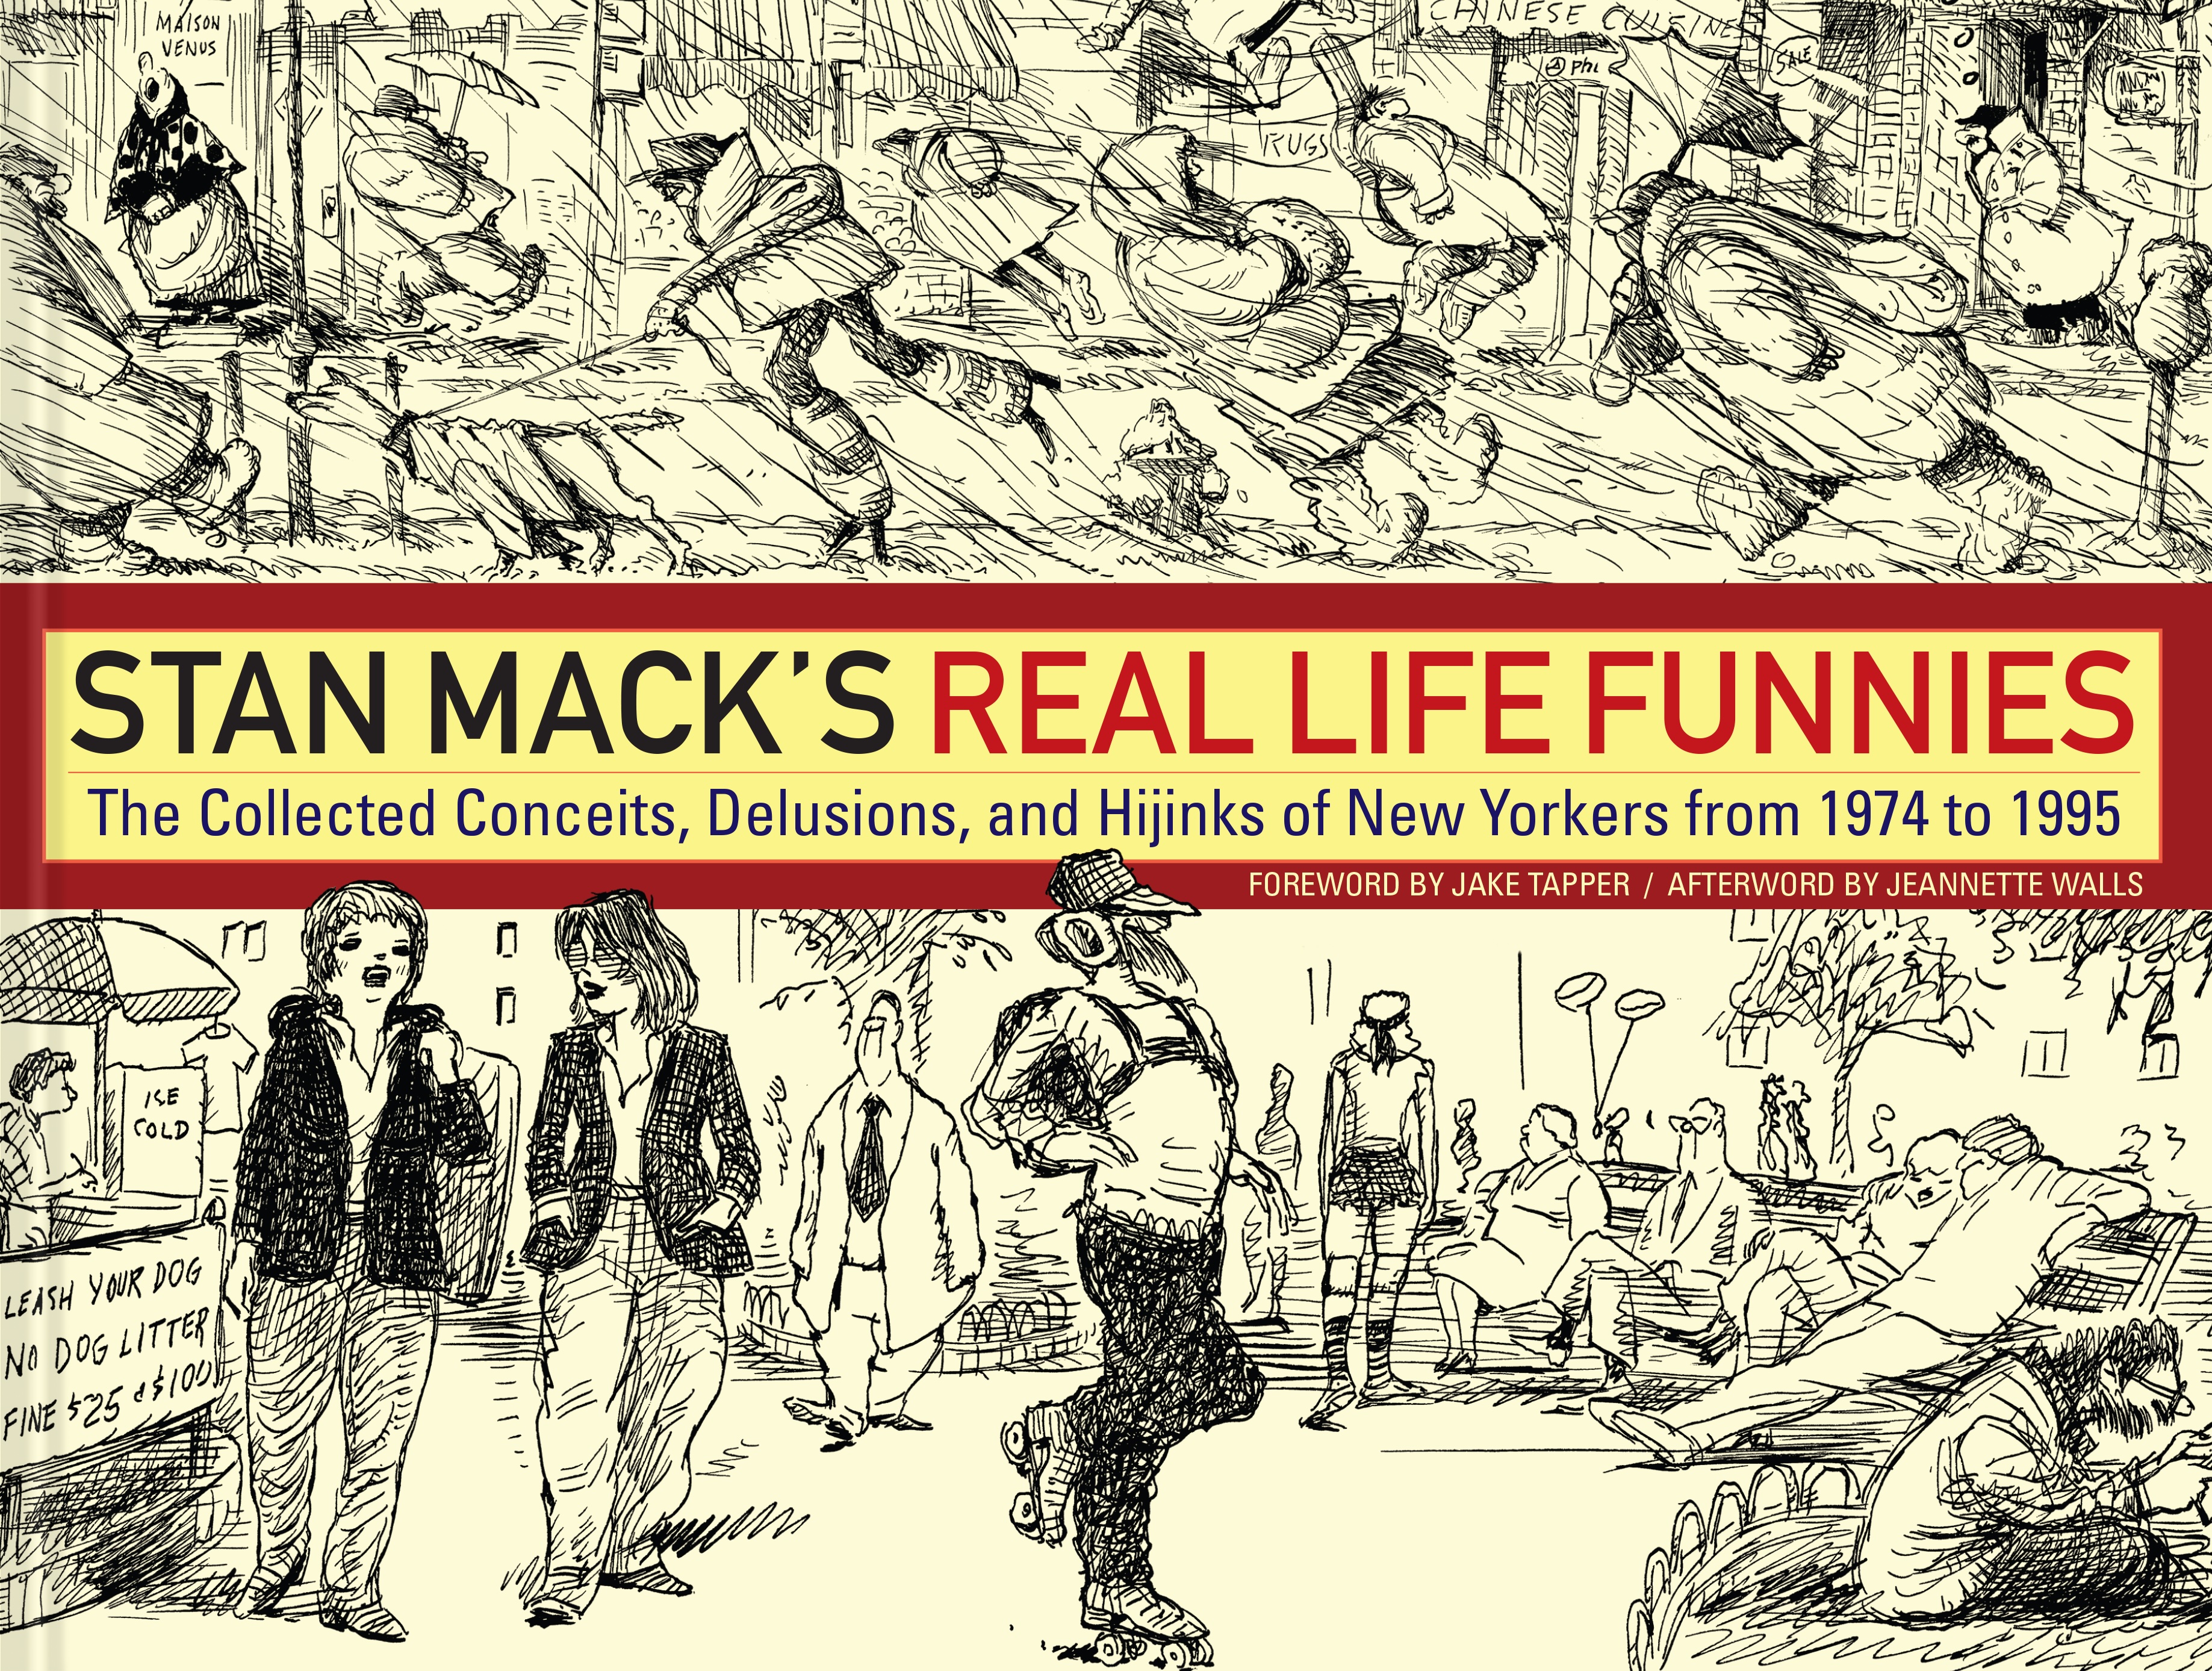 Stan Mack's Real Life Funnies Hardcover Graphic Novel Fantagraphics Underground